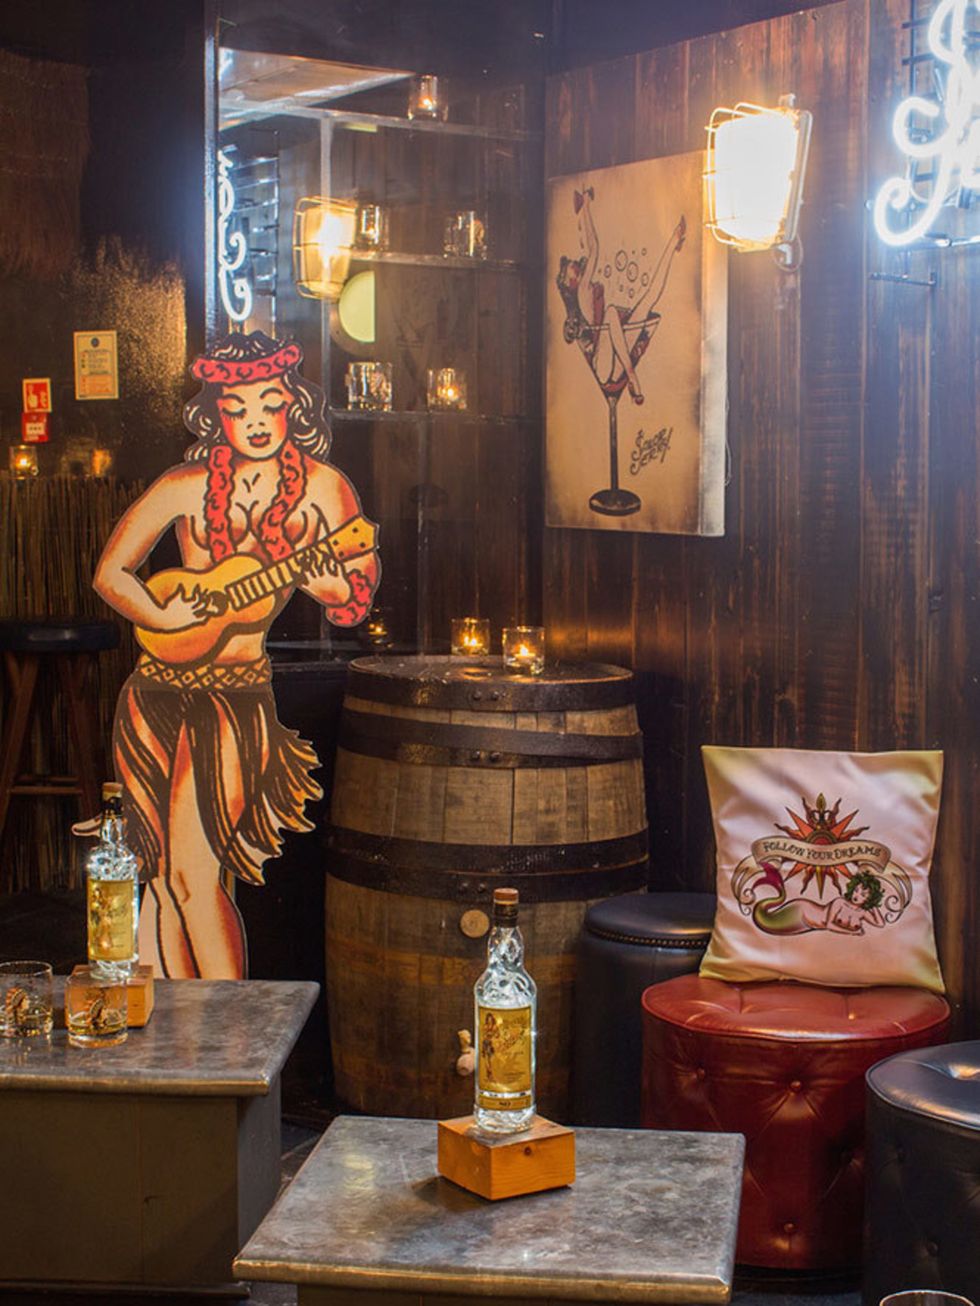 <p>DRINK: <a href="http://Downthewell.co.uk" target="_blank">Hotel Street Pop-Up at The Well </a></p>

<p>Yo ho ho and a bottle of rum! A new pop-up devoted to everyone&rsquo;s favourite sailor (that&rsquo;s Jerry, not Popeye) is landing in the basement o